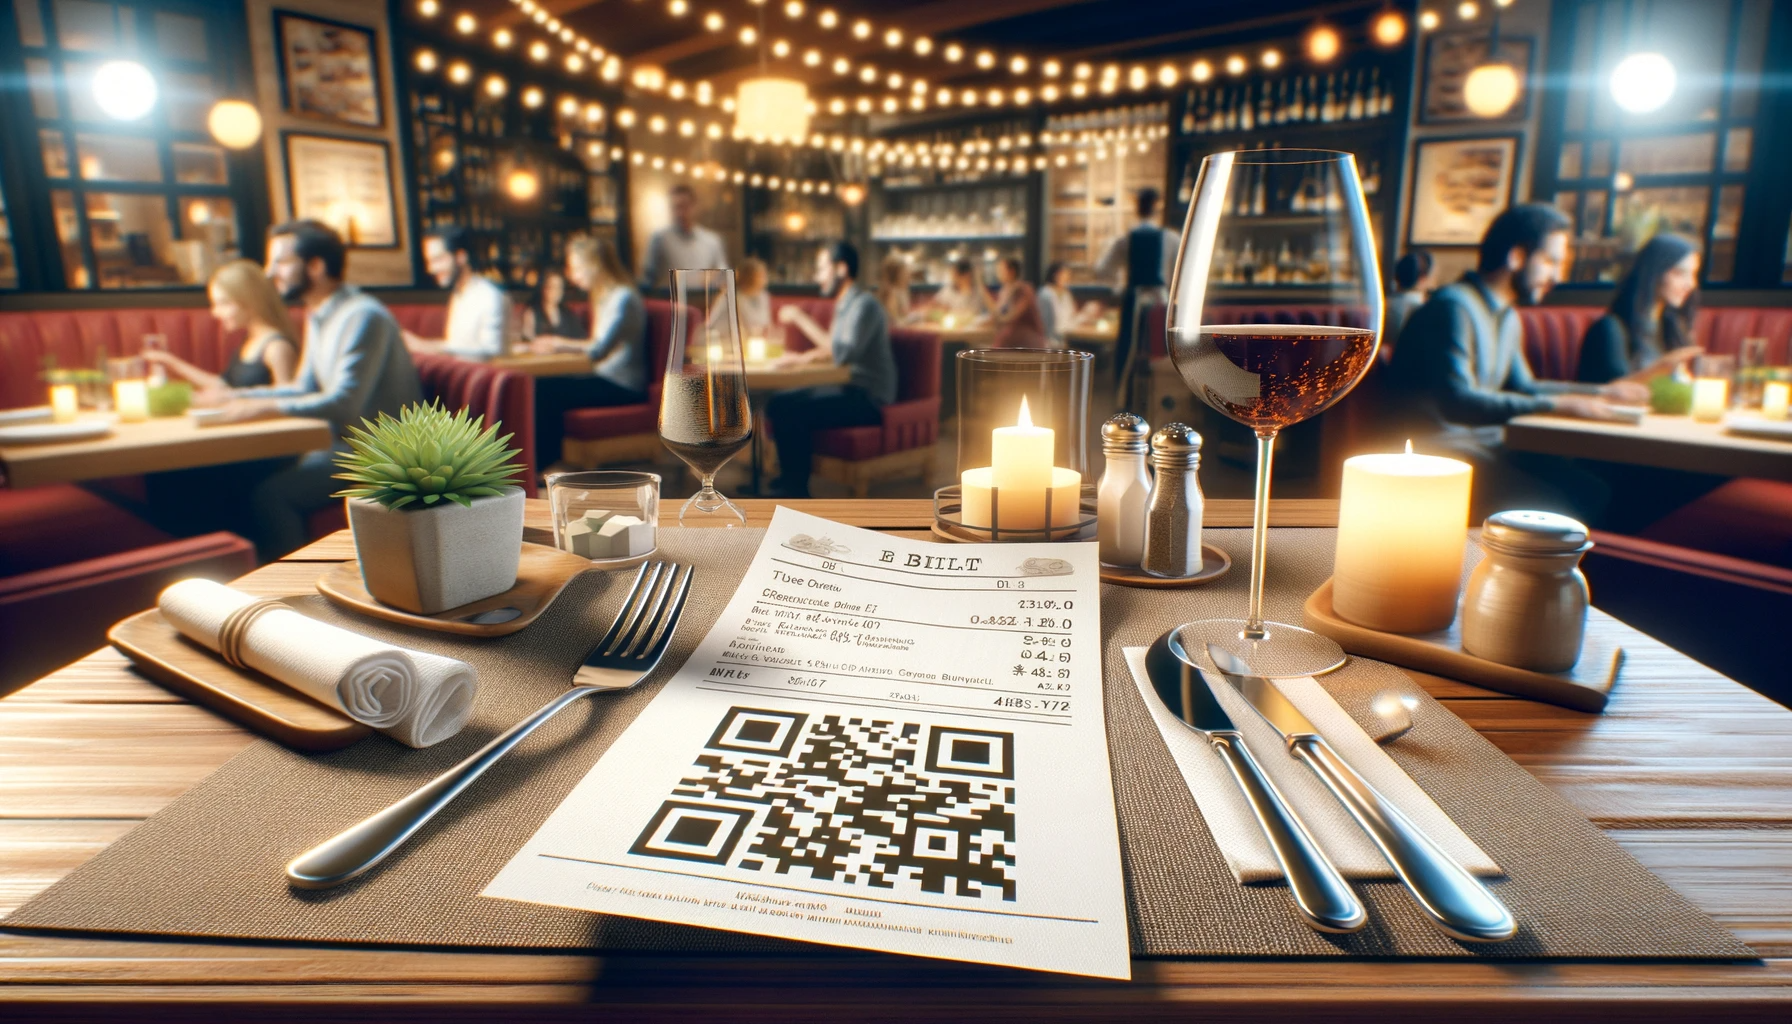 A realistic photo-style image of a restaurant scene. The focus is on a table with a bill and a clearly visible QR code next to it, implying a request .png